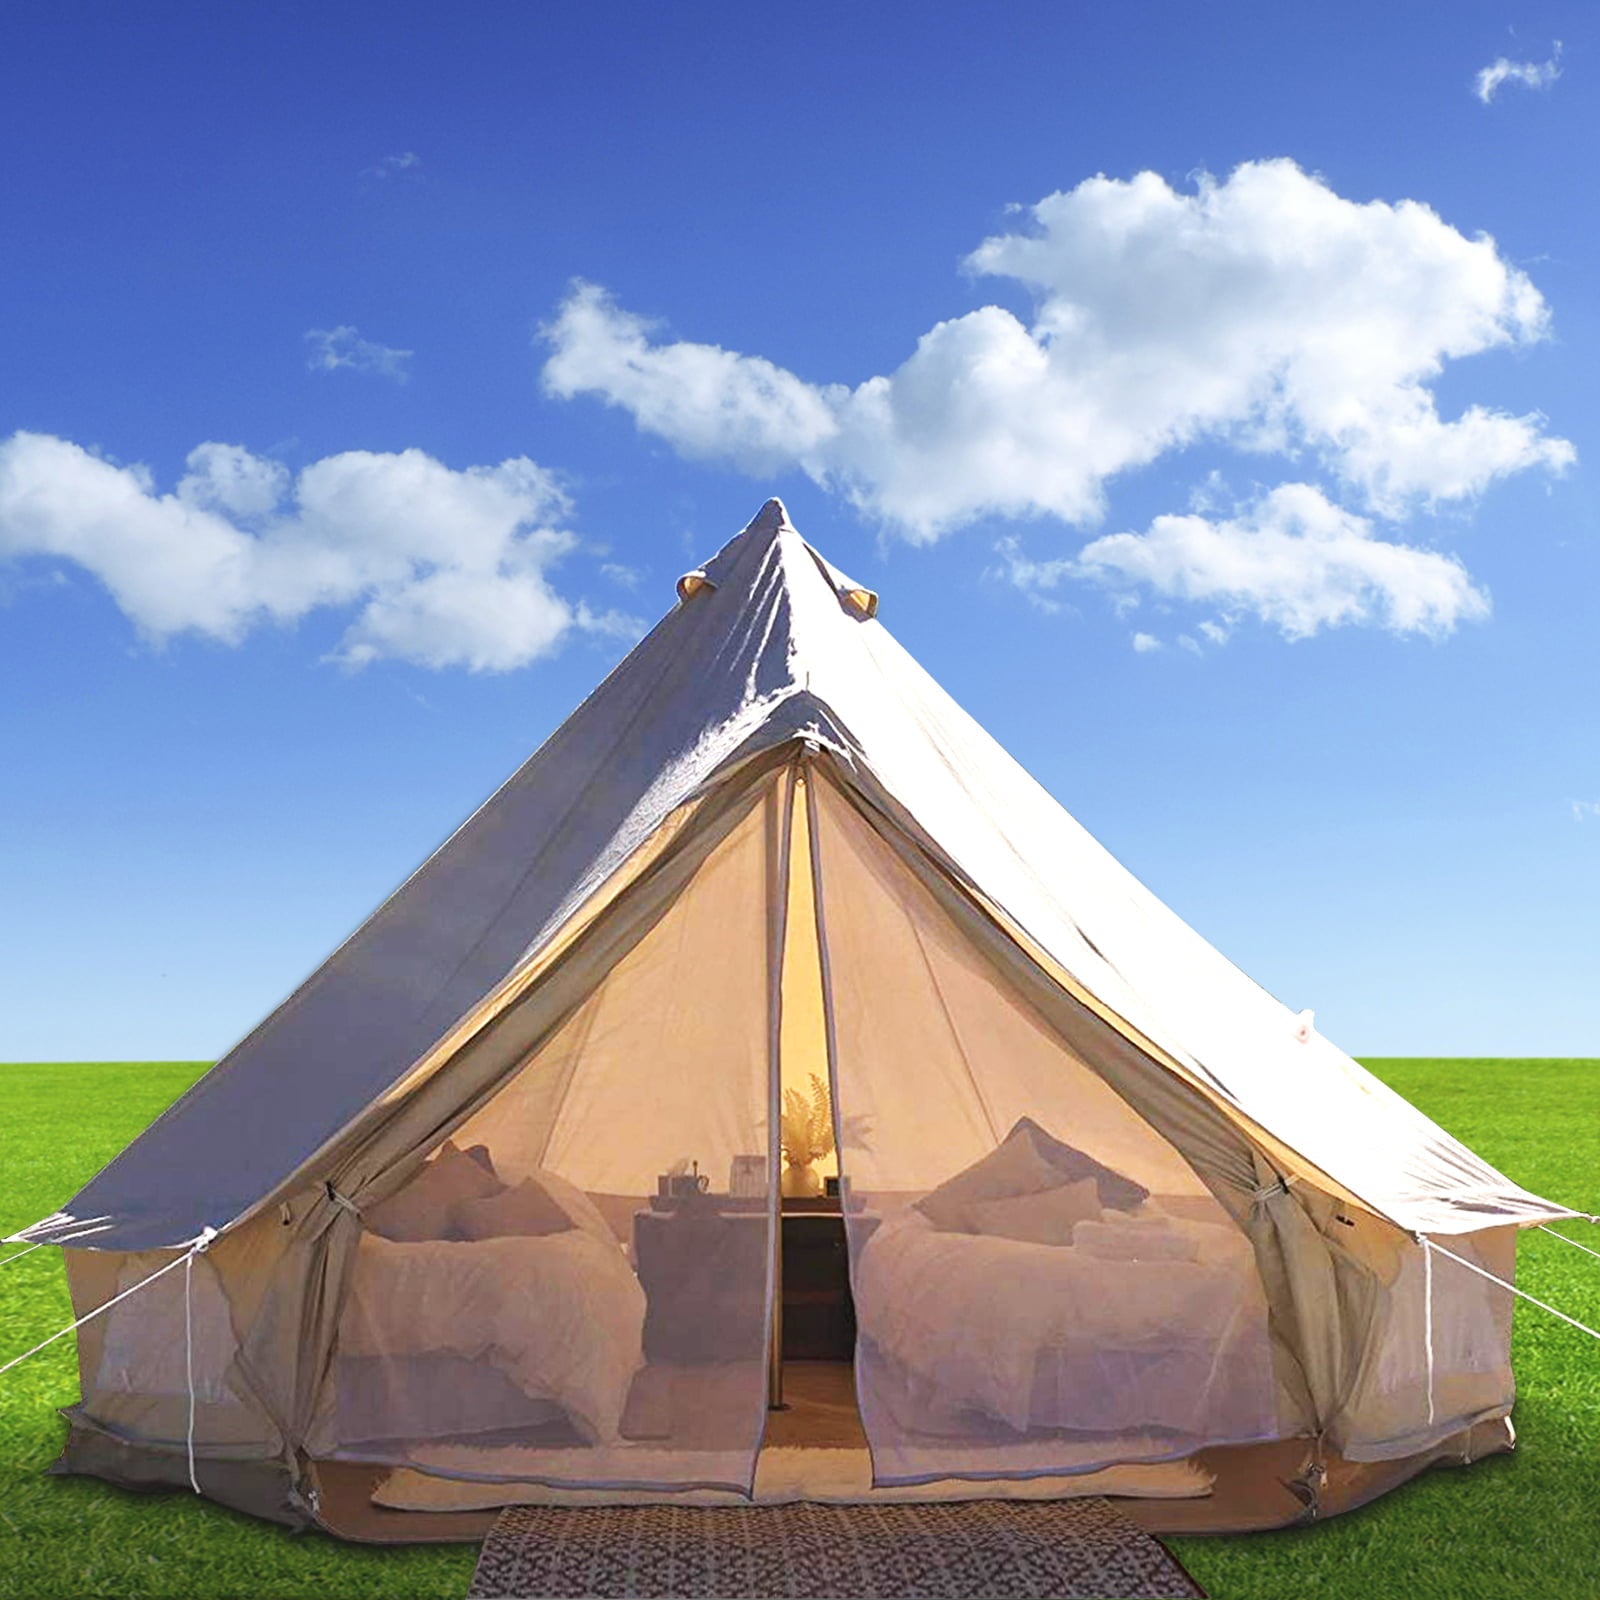 VEVORbrand Canvas Bell Tent 23ft Cotton Canvas Tent with Wall Stove Jacket Glamping Tent Waterproof Bell Tent for Family Camping Outdoor Hunting in 4 Seasons